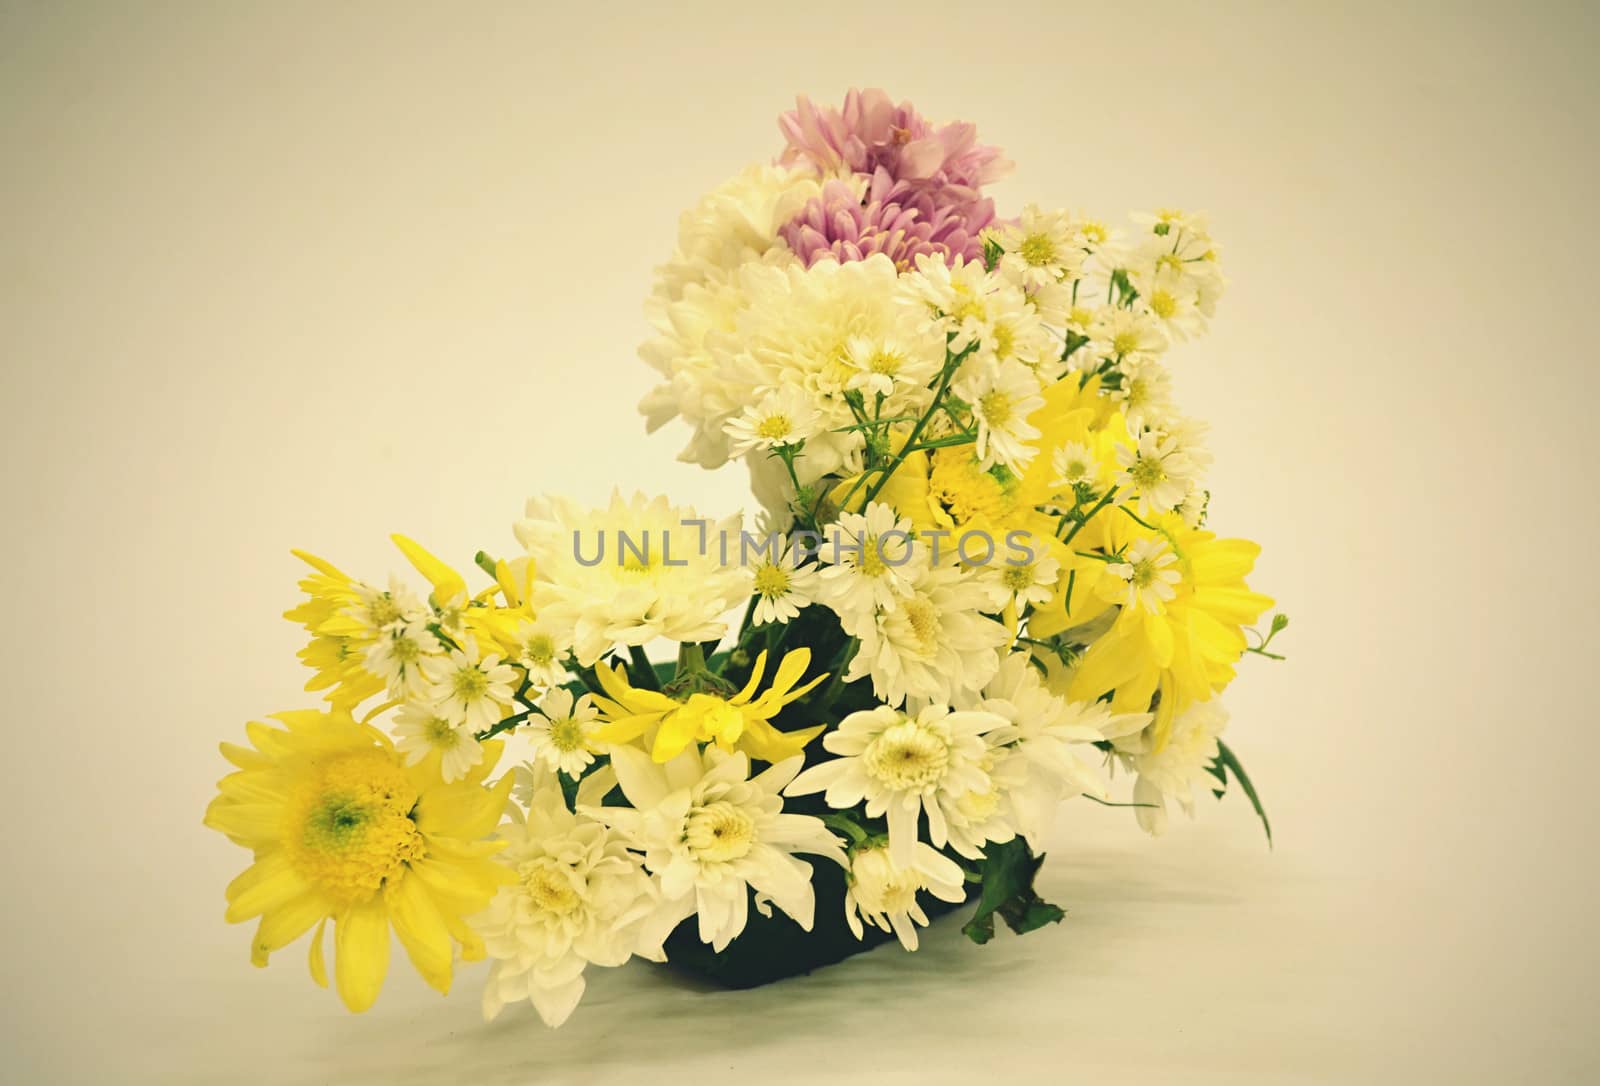 Bouquet of Flowers in a Glass on Vintage background